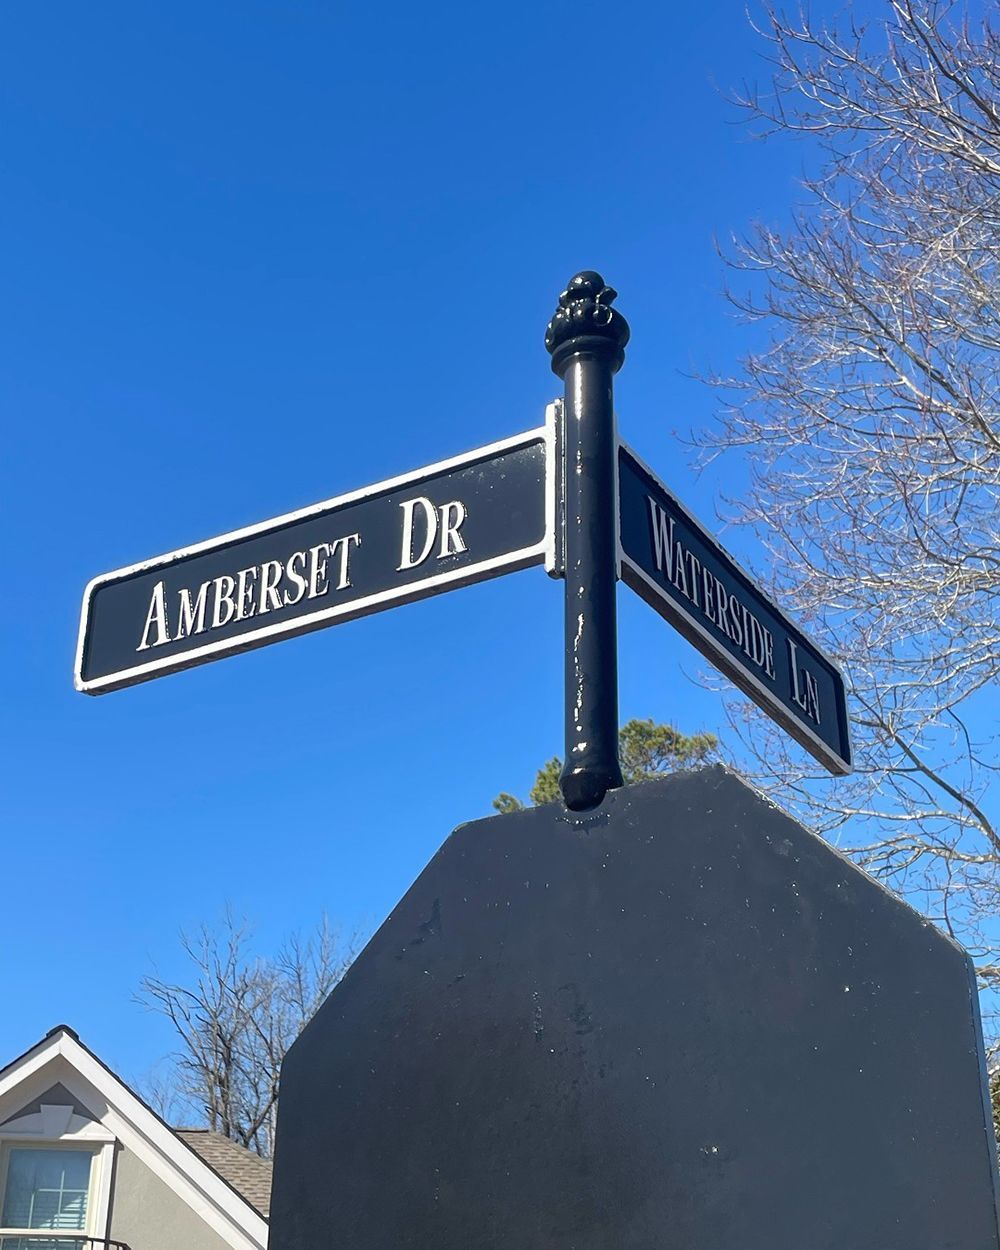 A street sign that says Amberset Dr on it